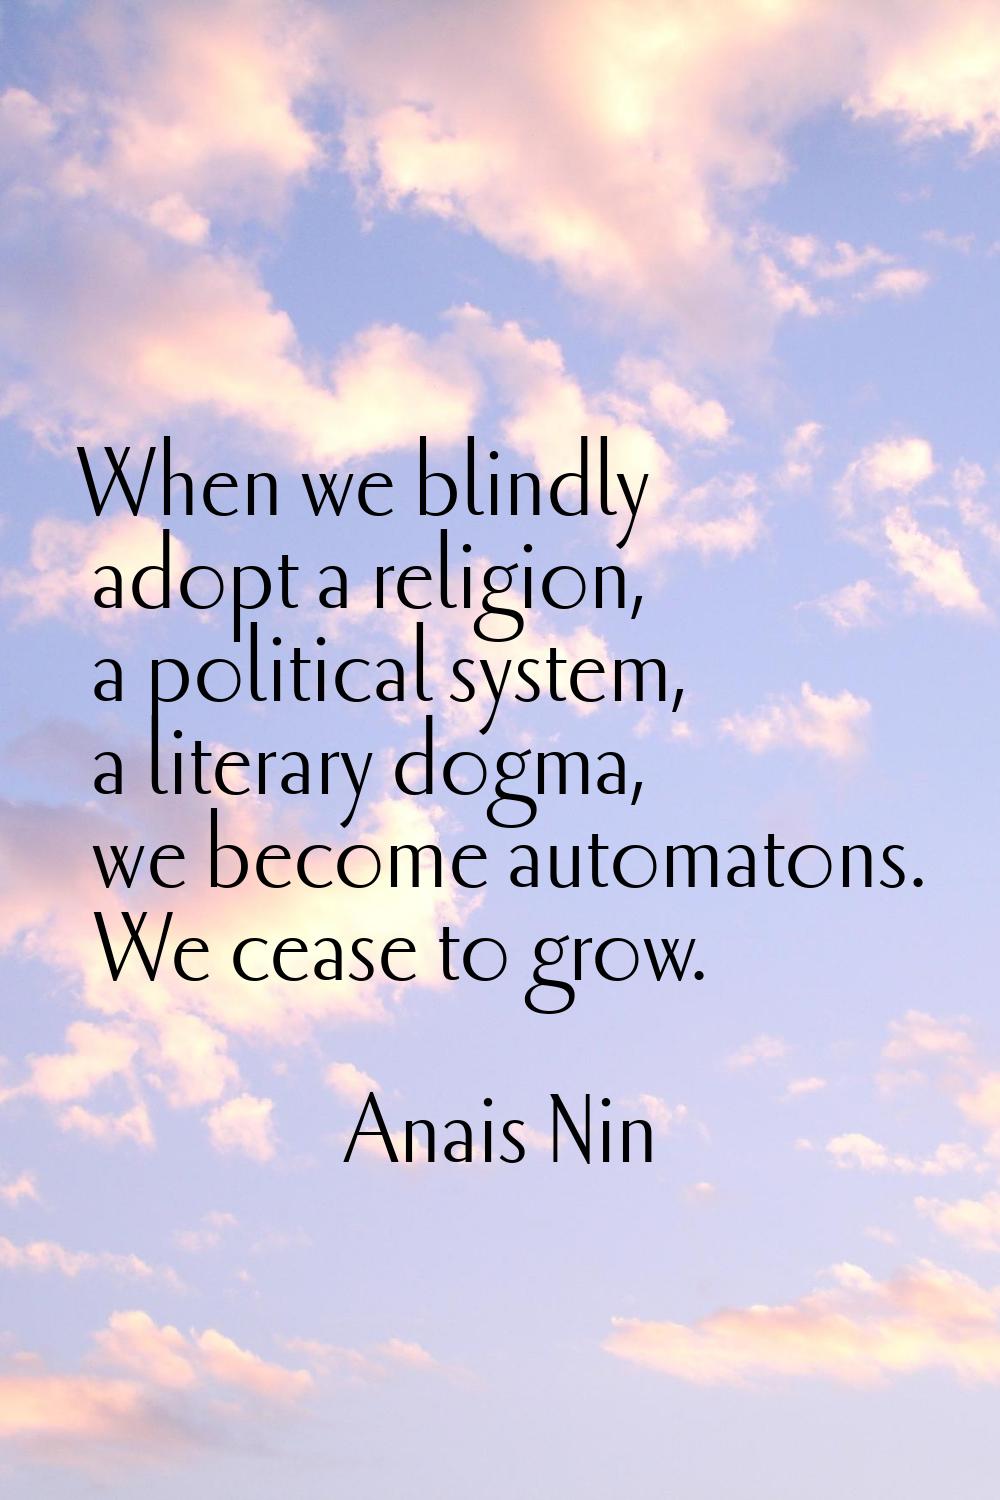 When we blindly adopt a religion, a political system, a literary dogma, we become automatons. We ce